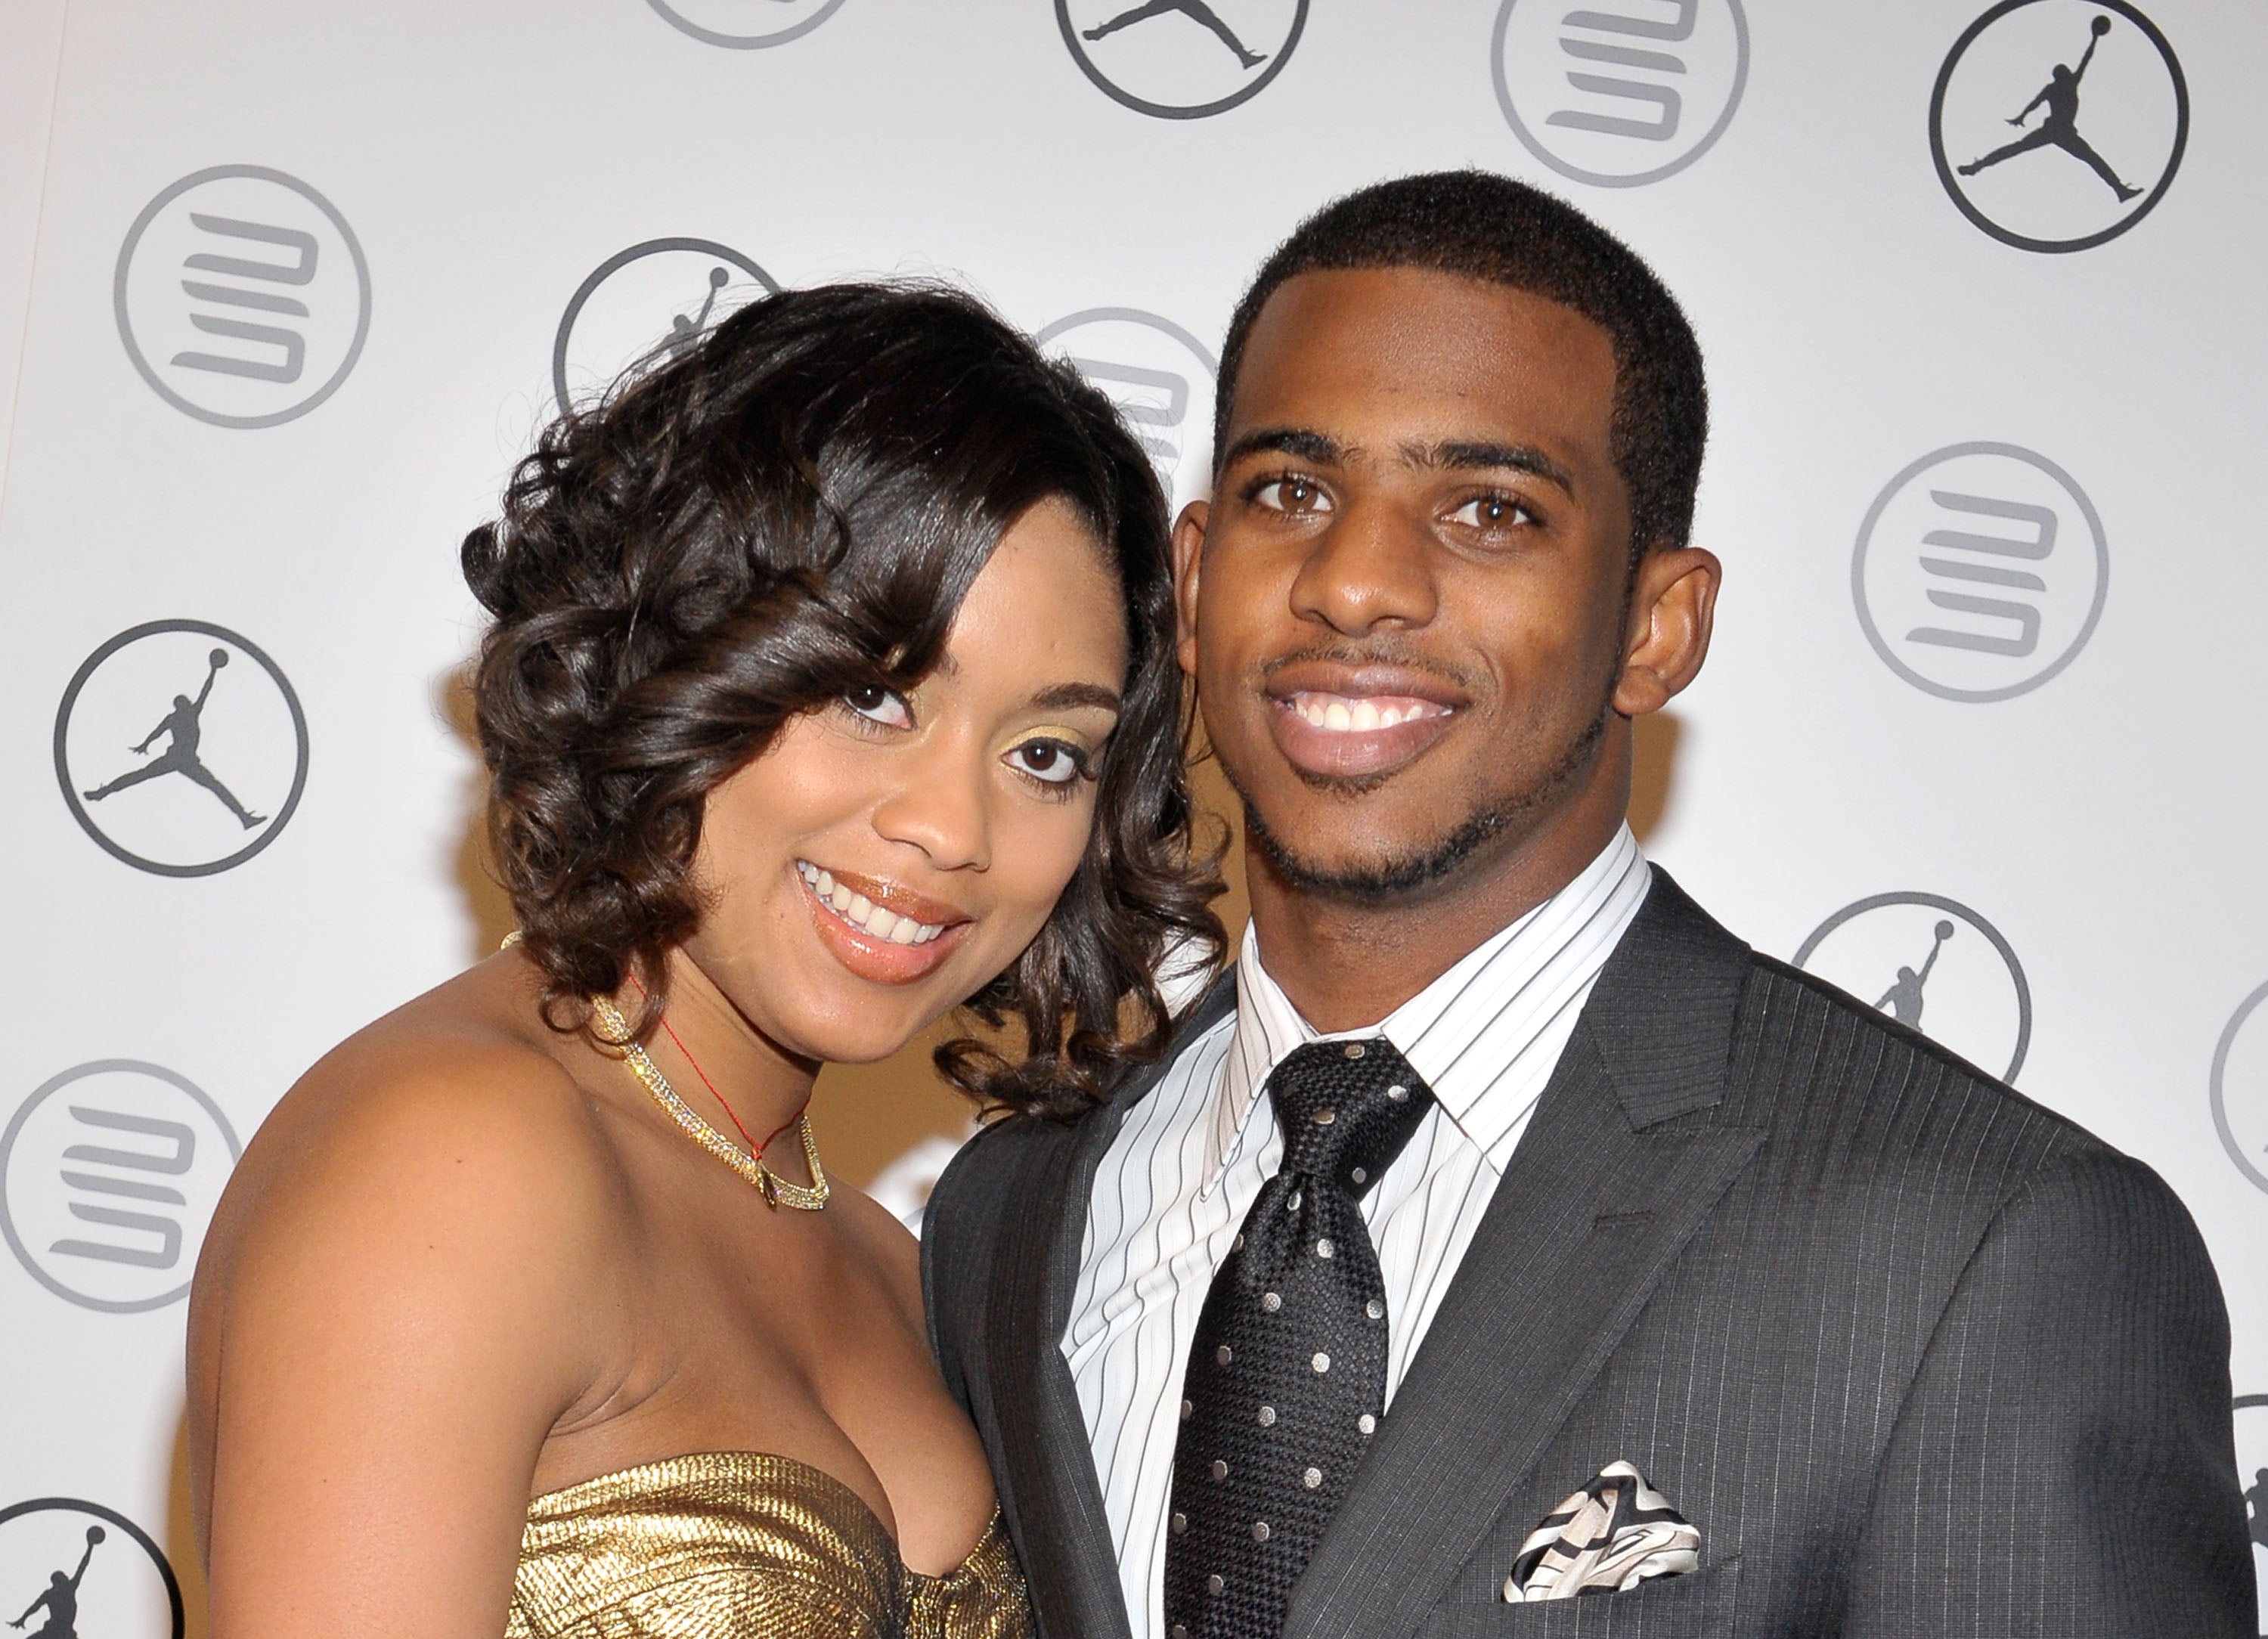 EXCLUSIVE: Chris Paul and Wife Expecting Baby Girl